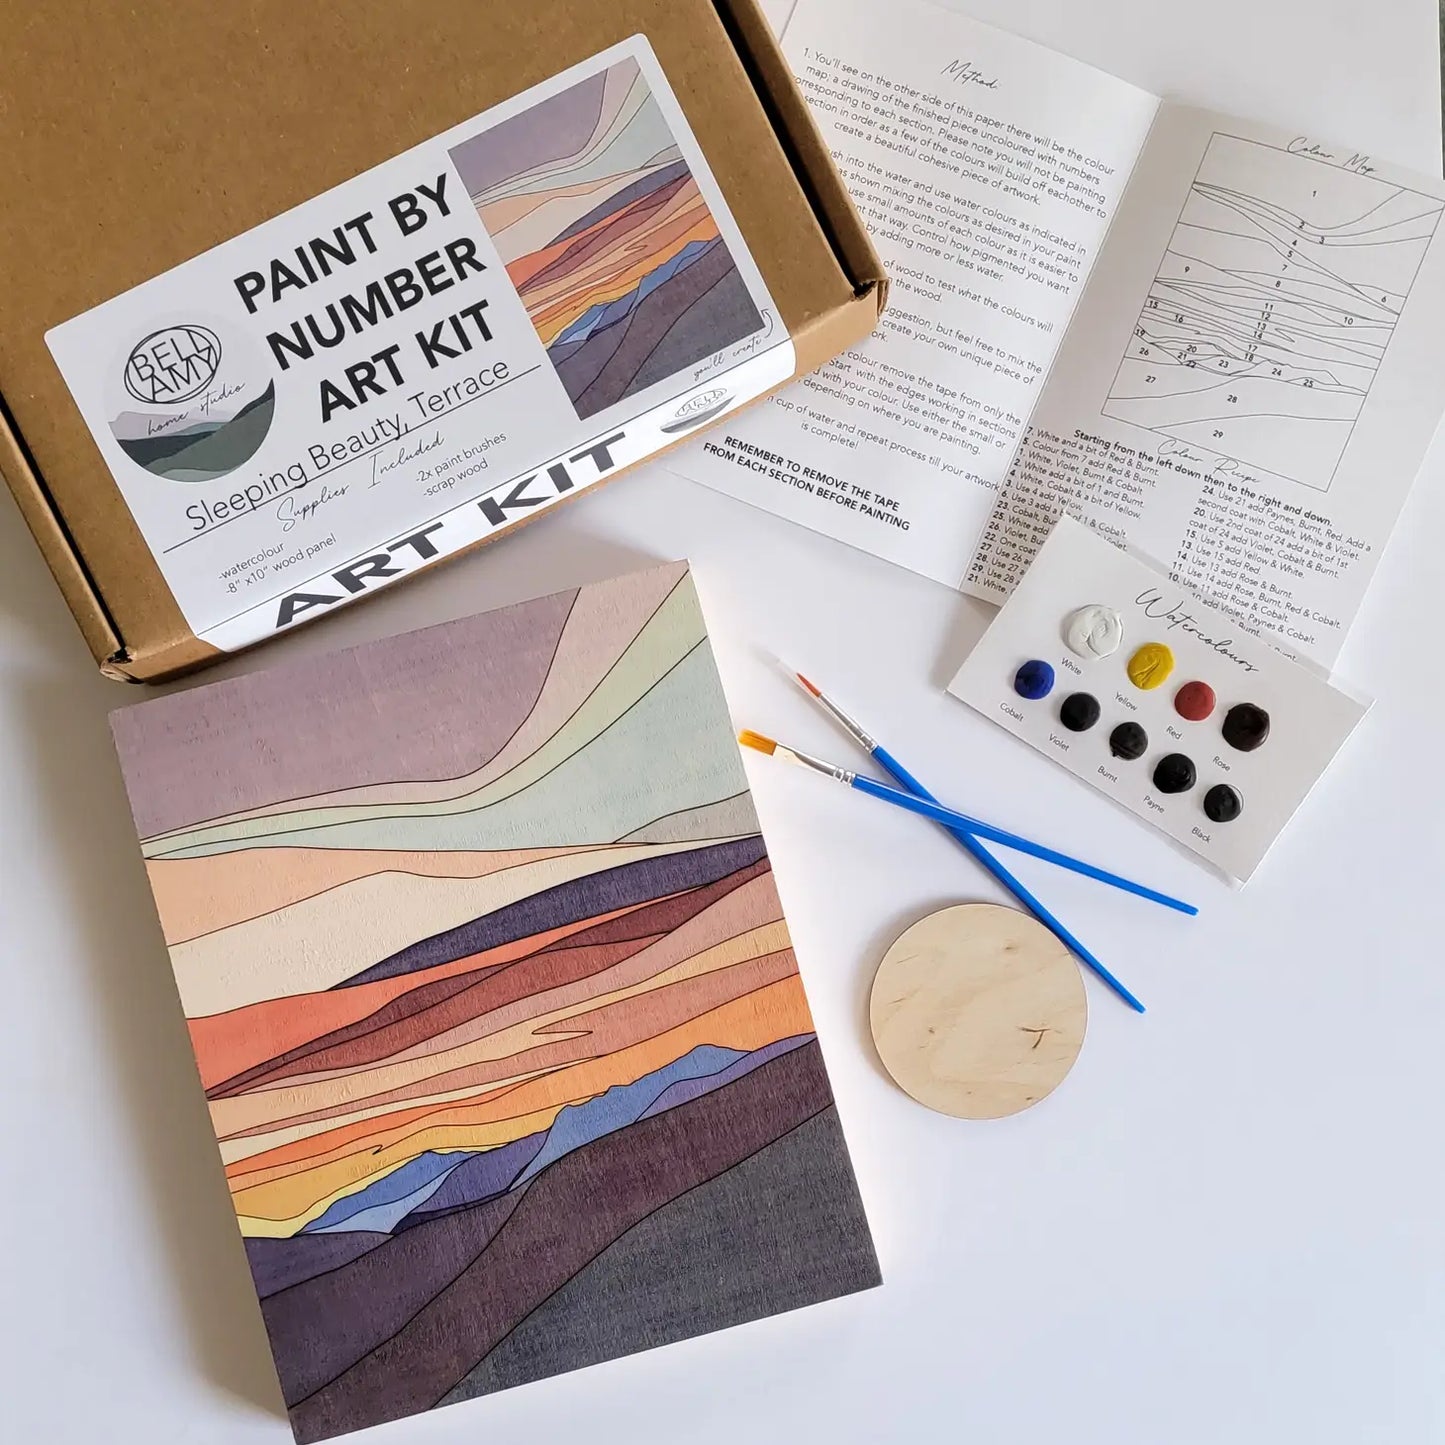 Paint By Number Art Kit